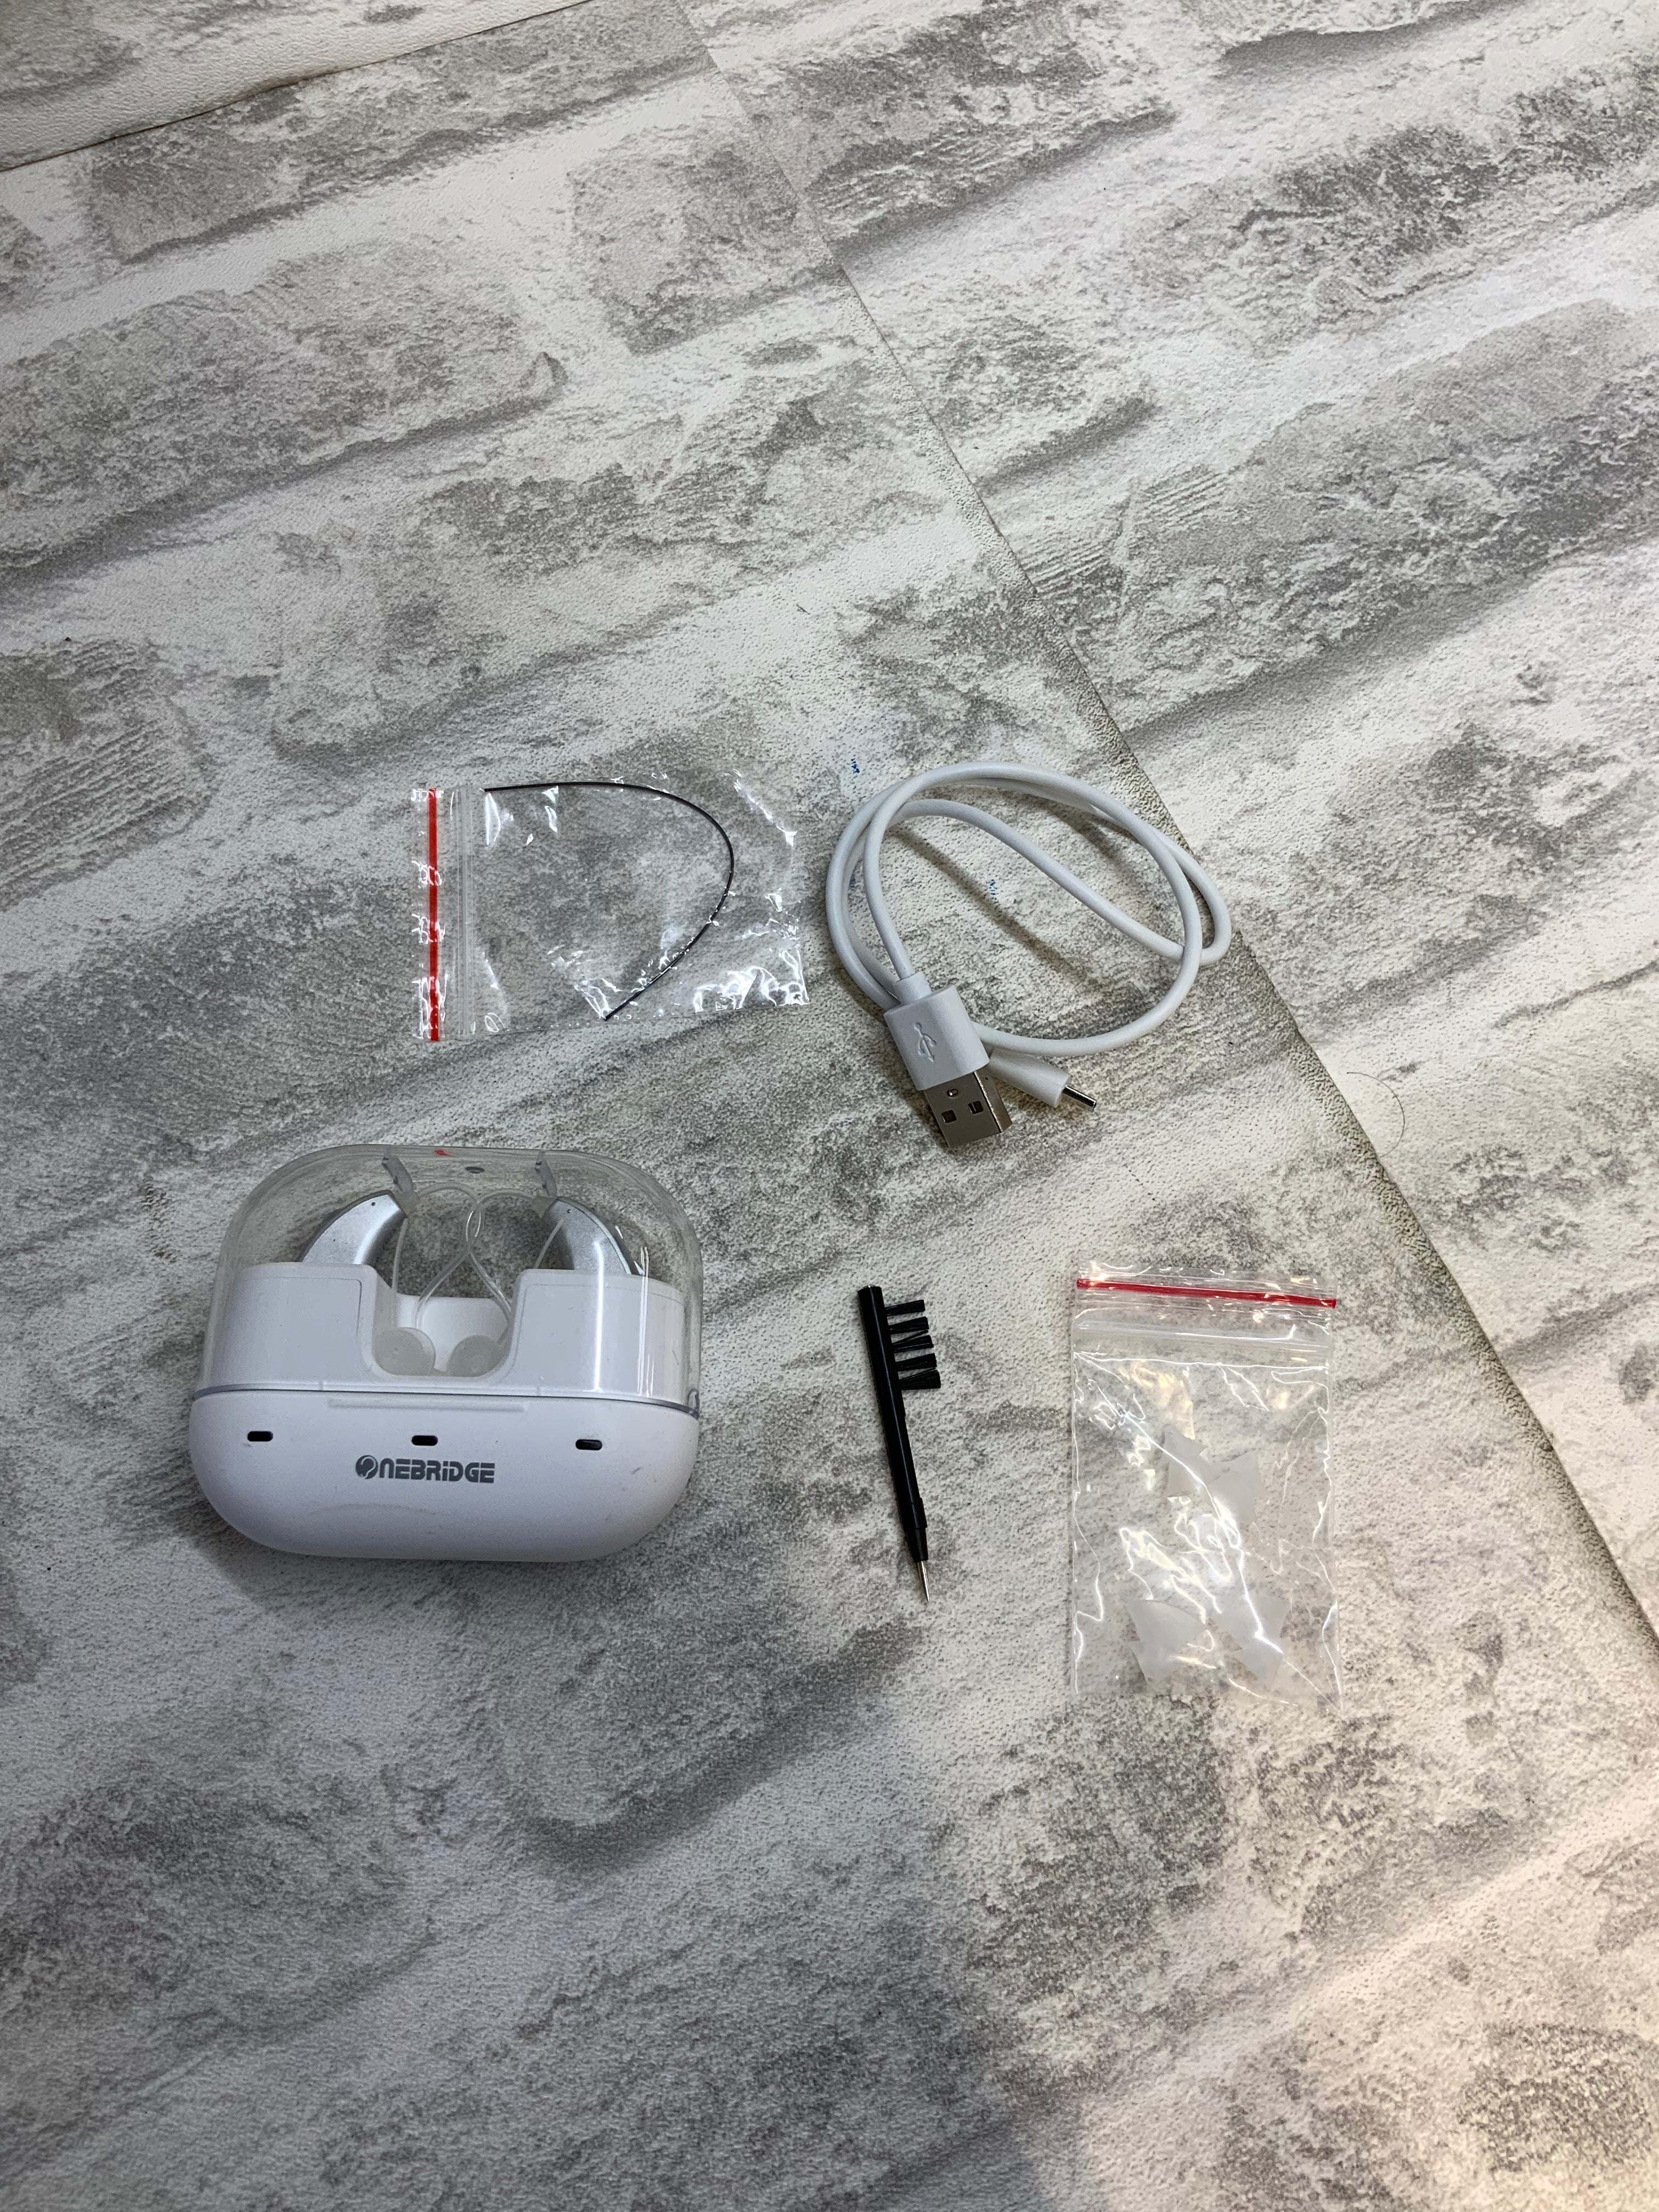 Onebridge Rechargeable Hearing Aids, Noise Cancelling and Portable Charging Box